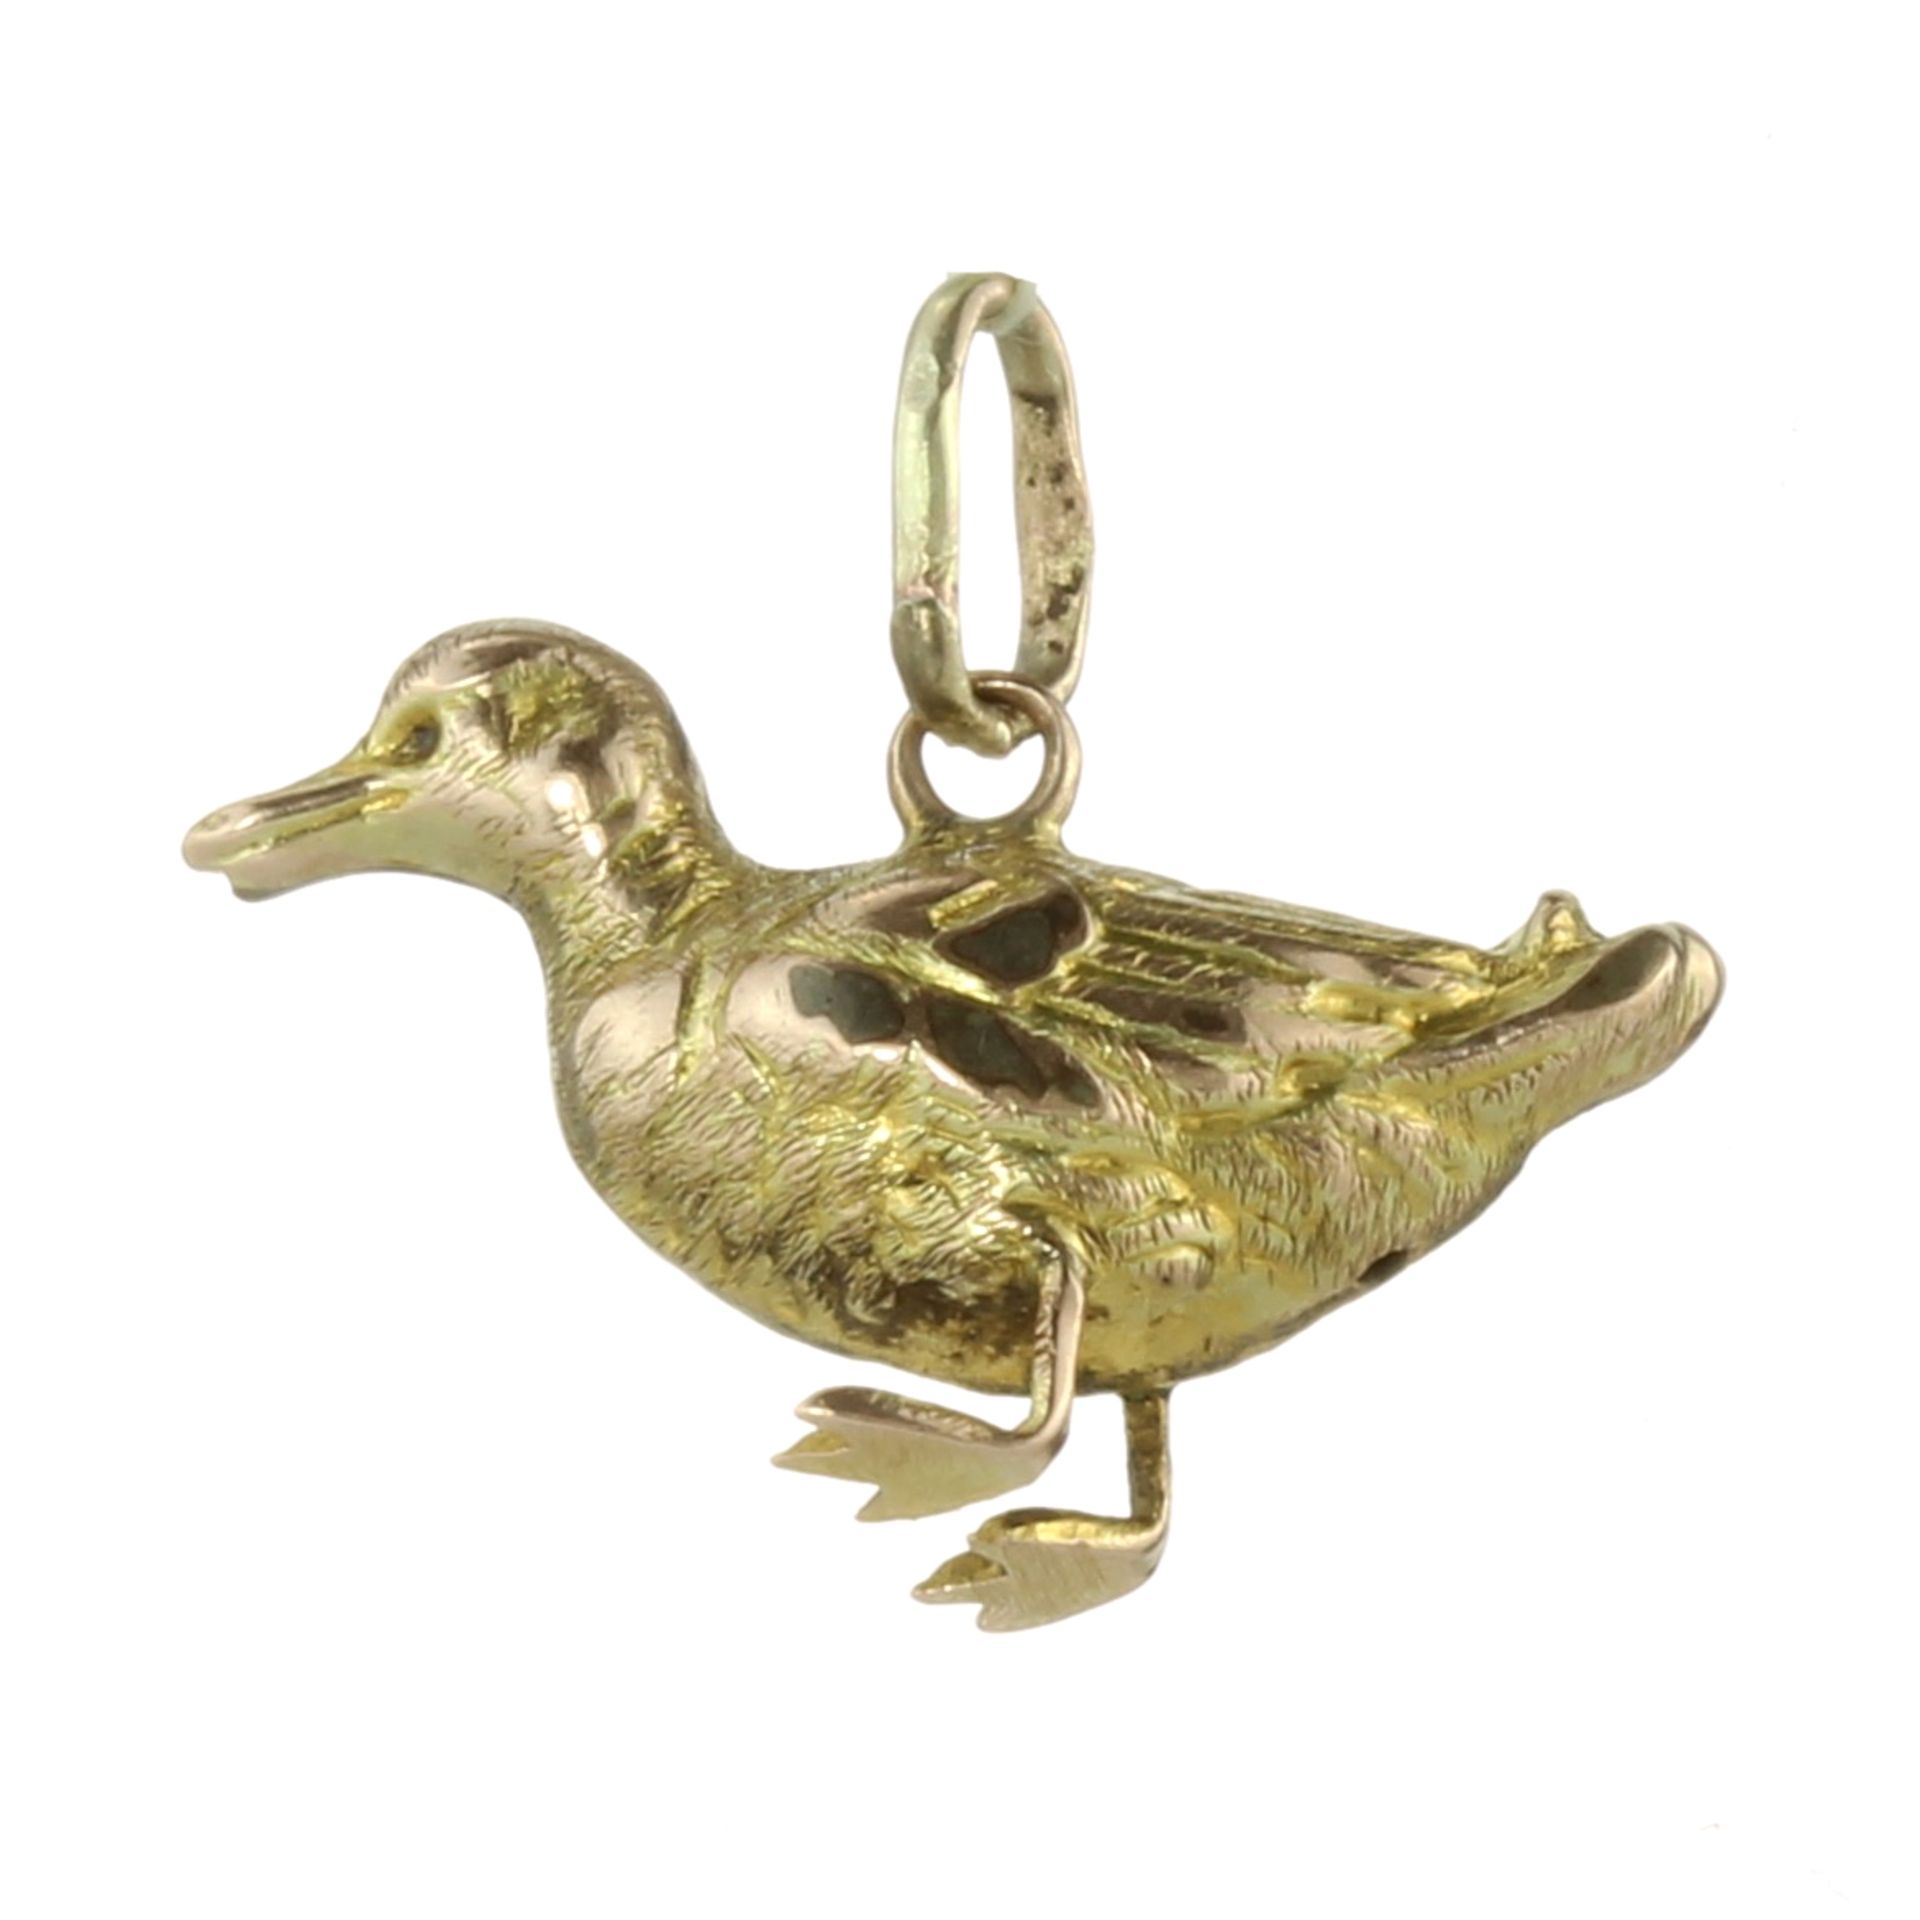 A DUCK PENDANT / CHARM in yellow gold designed as a duck in detailed relief. Apparently unmarked,